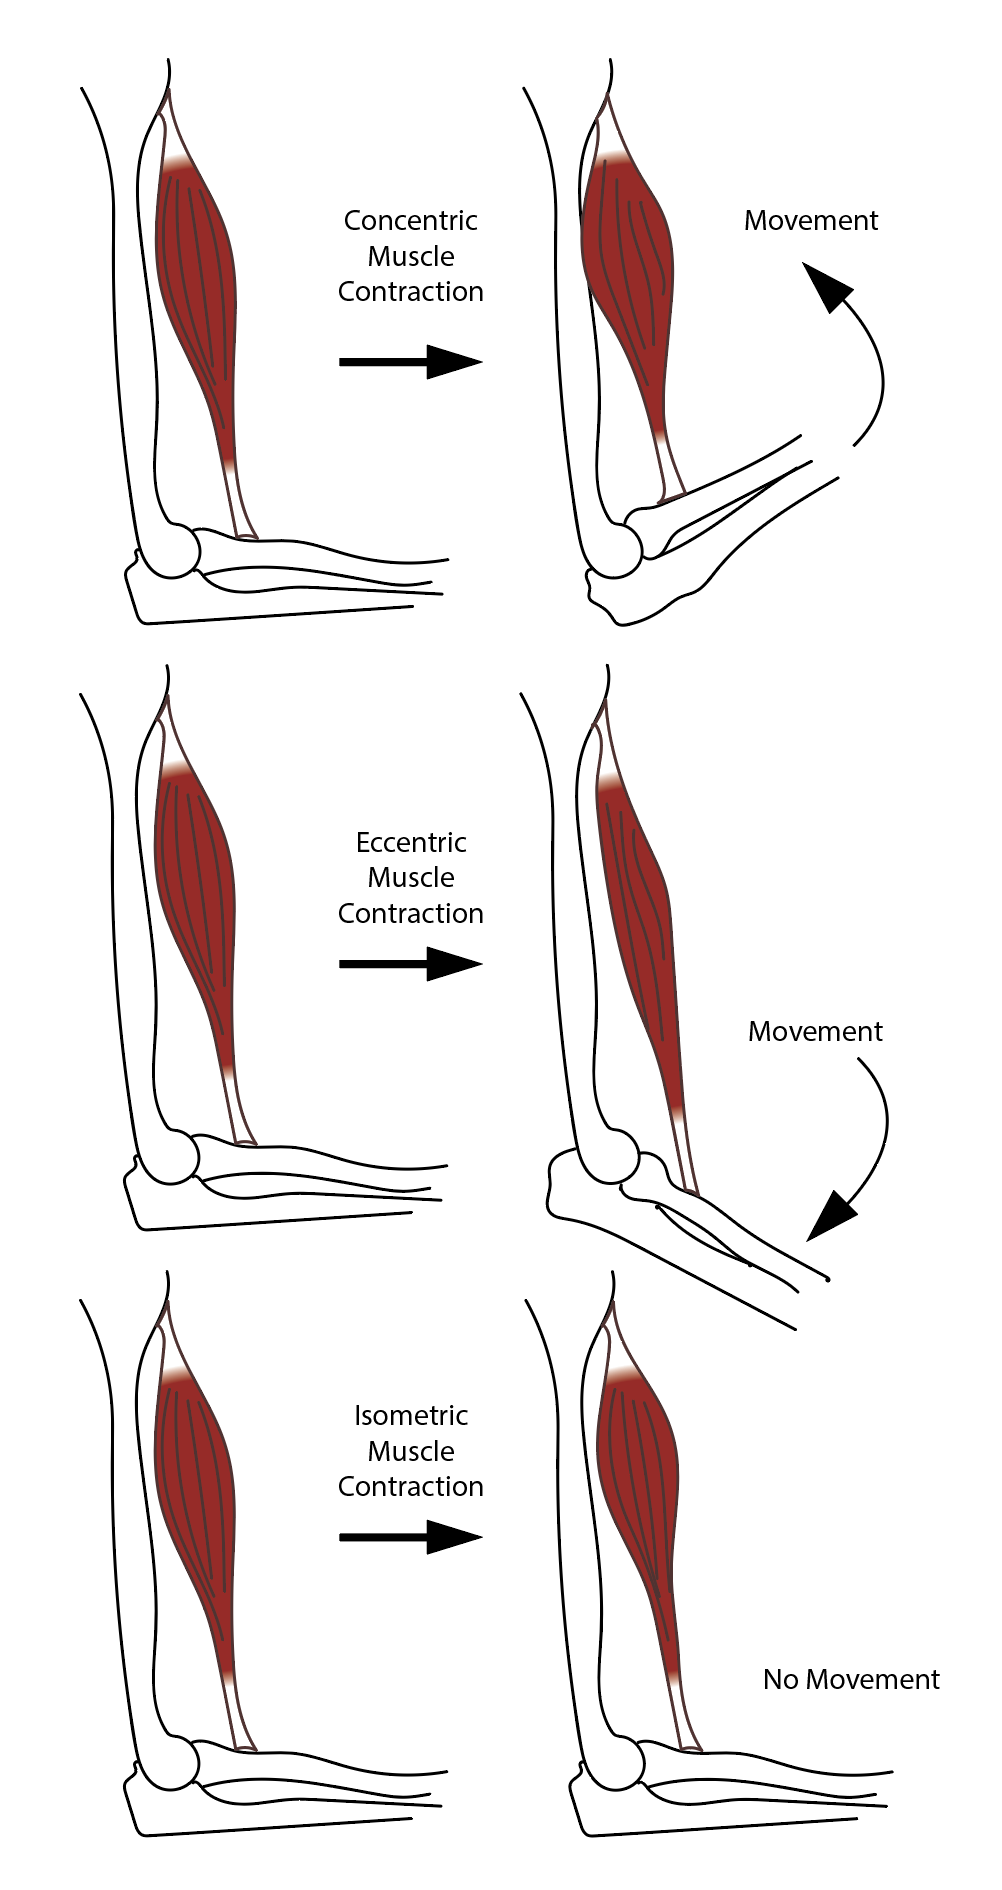 Diagram showing the different categories of muscle contraction.